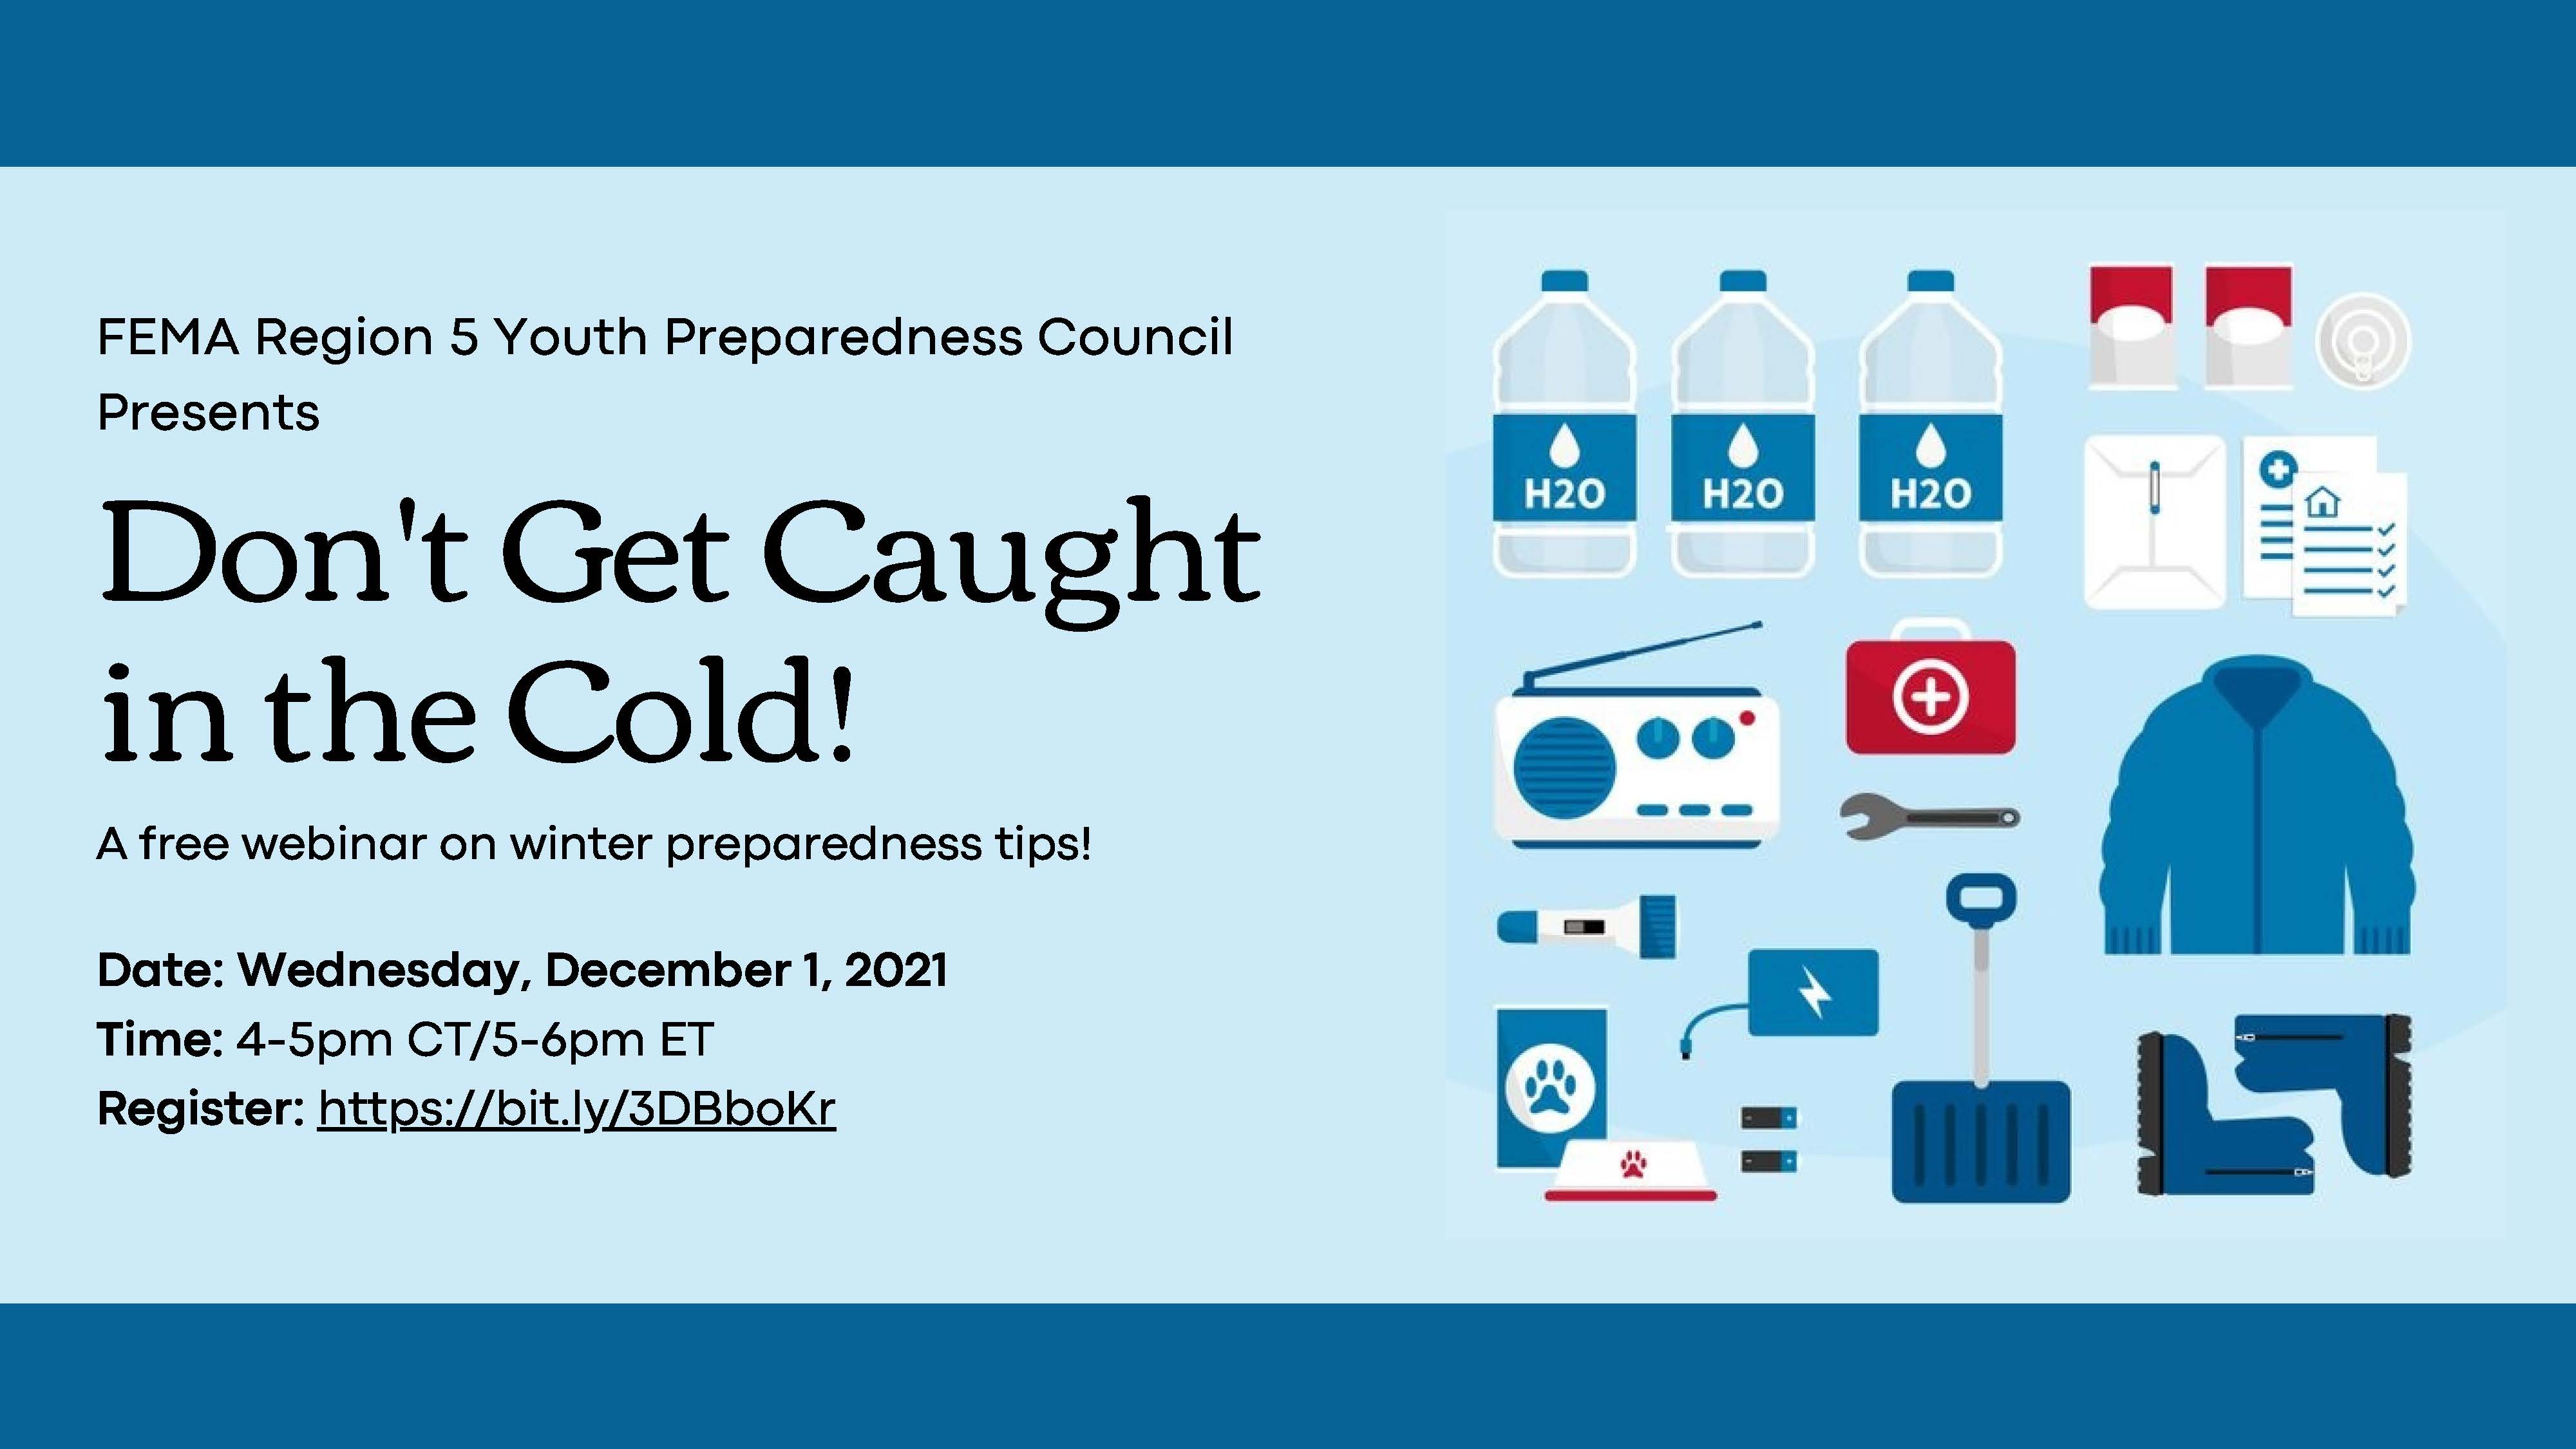 FEMA Region 5 Youth Preparedness Council Presents 'Don't Get Caught in the Cold!' A free webinar on winter preparedness tips! Date: Wednesday December 1, 2021 Time: 4-5pm CT/5-6pm ET Images of winter weather preparedness items: water, radio, flashlight, boots, coats, shovel, first aid kit, pet supplies.